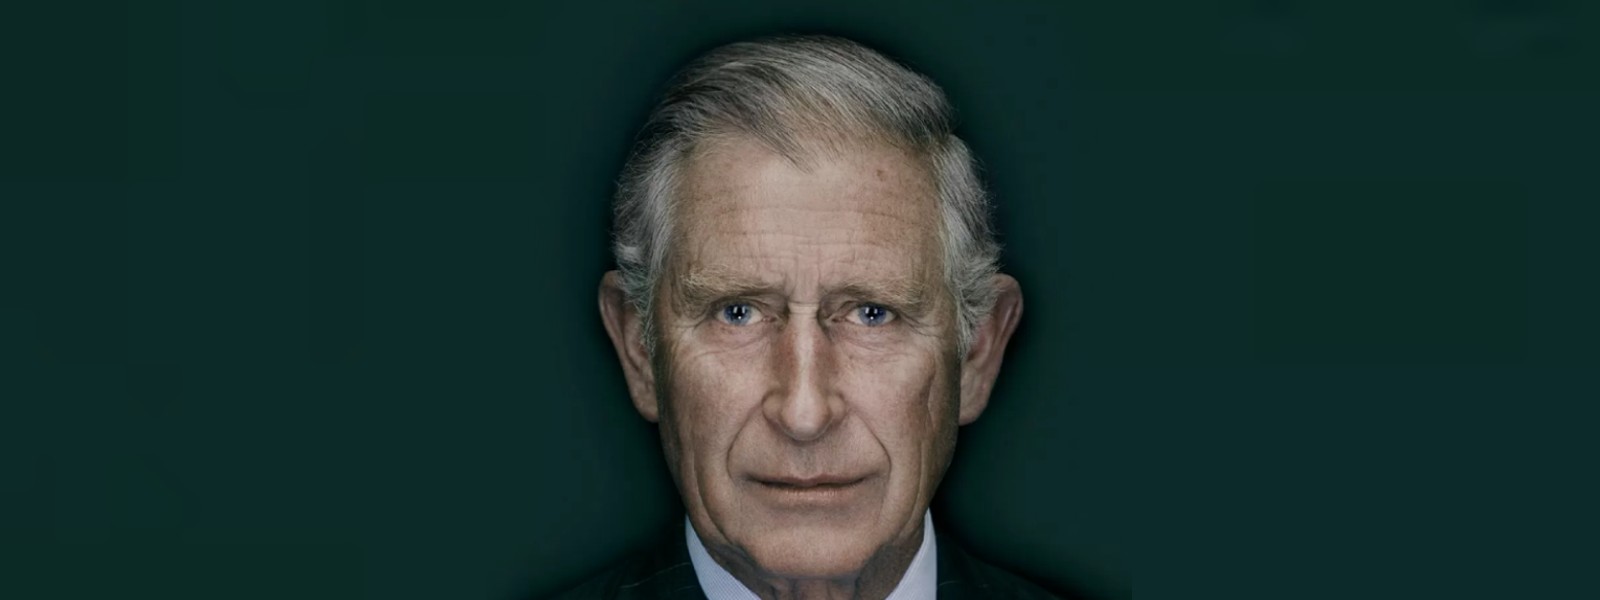 King Charles III, the new monarch